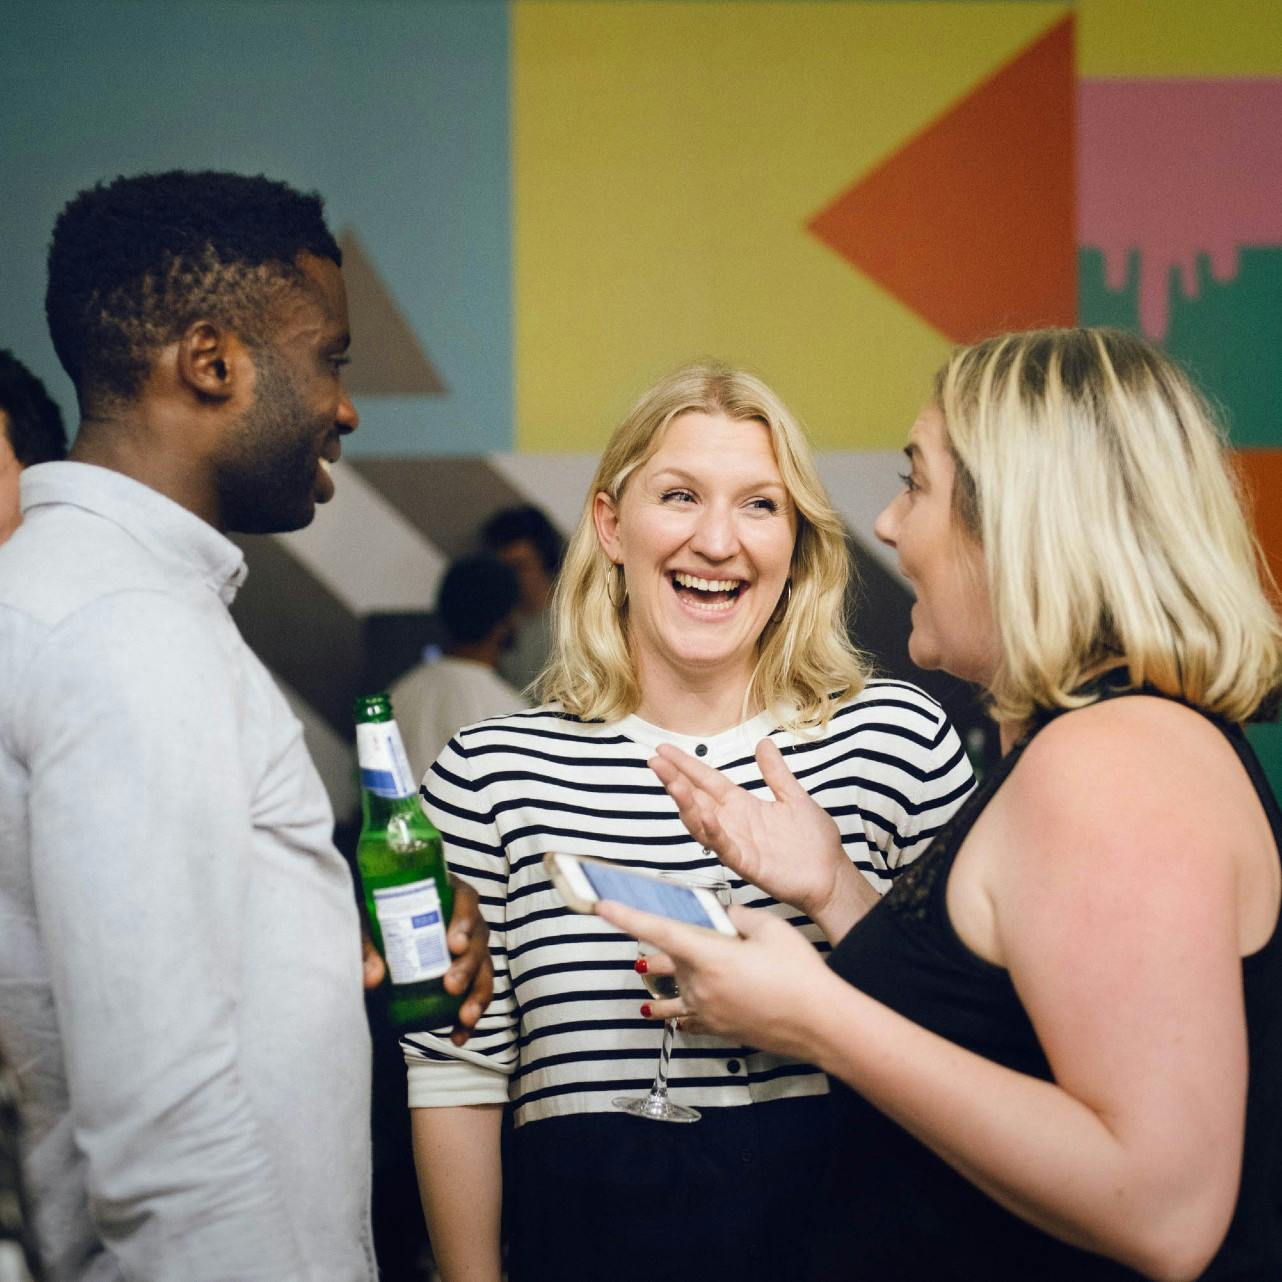 Huckletree west launch party